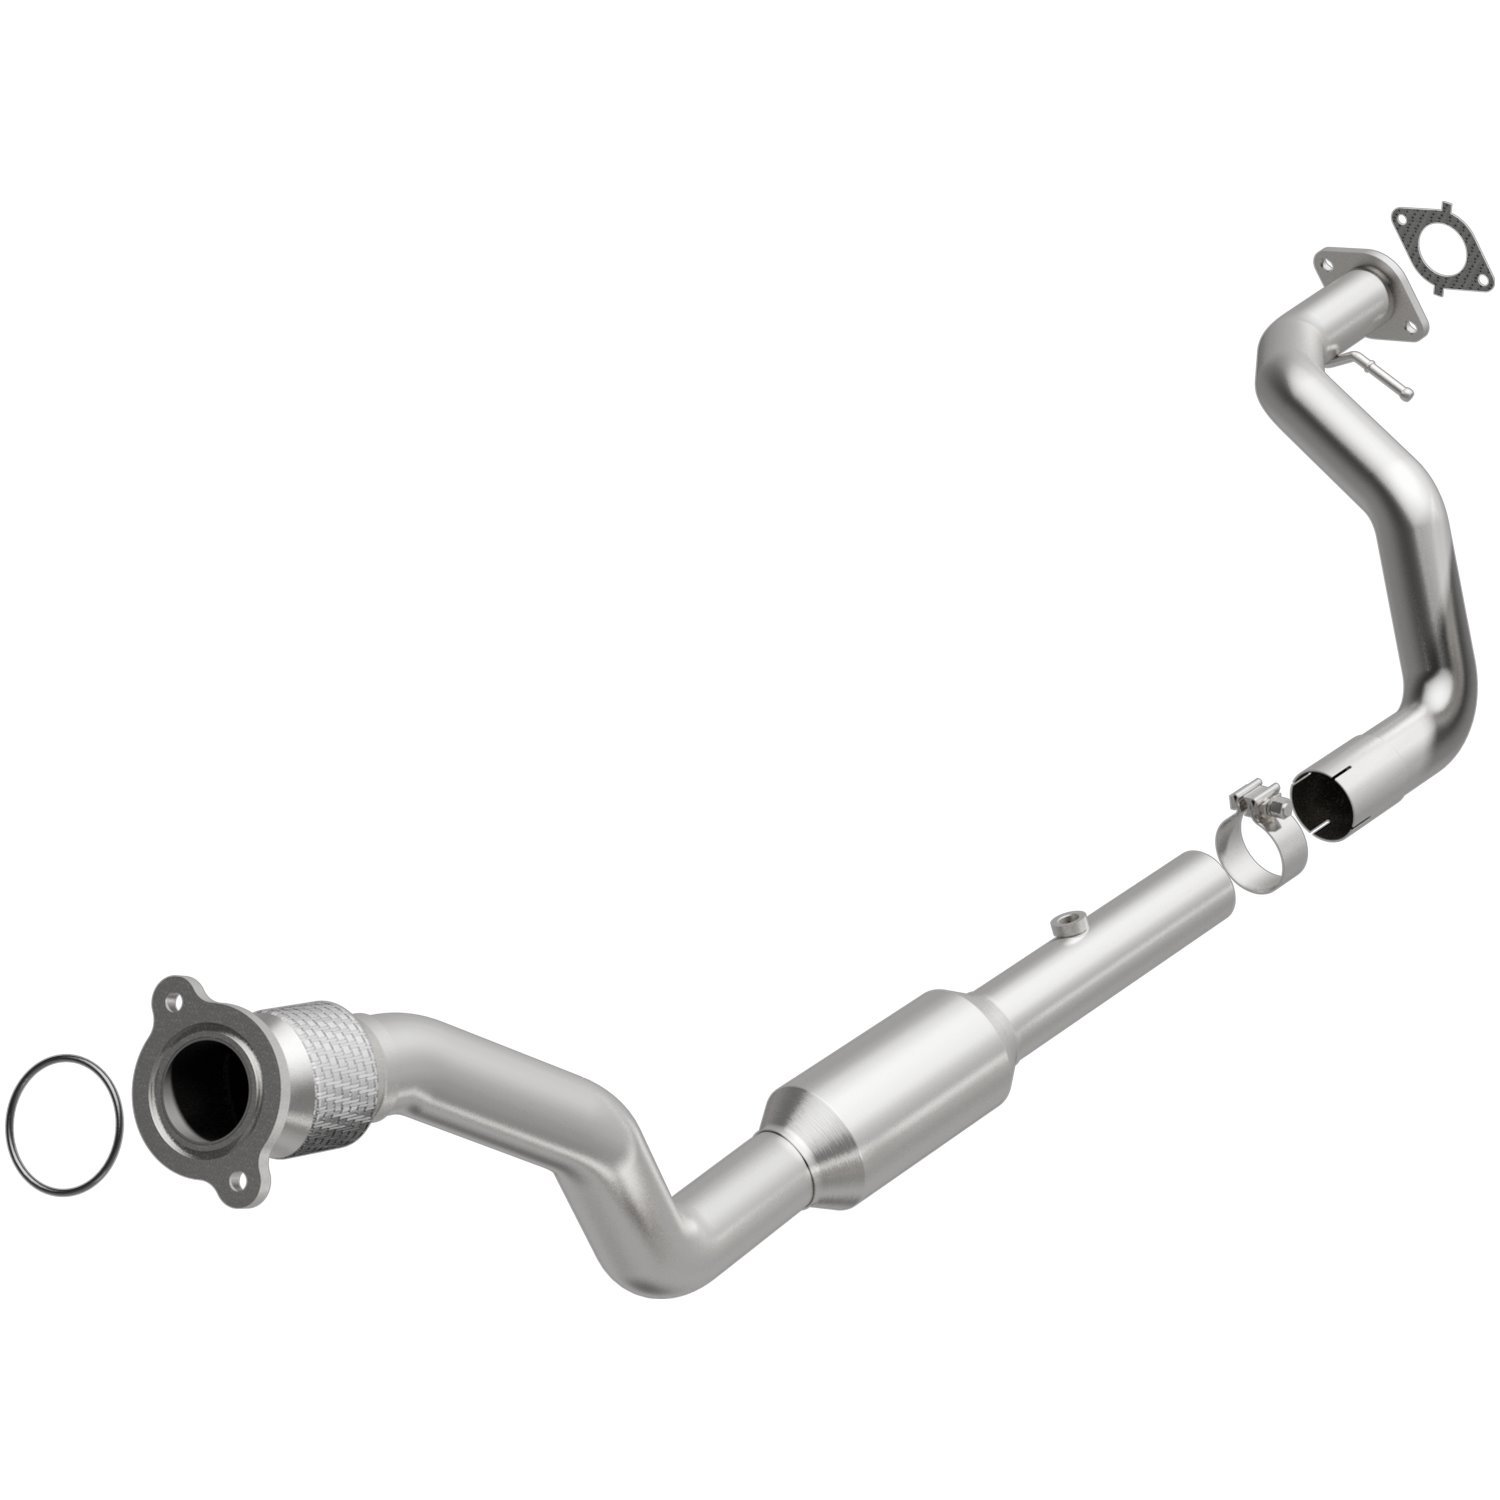 OEM Grade Federal / EPA Compliant Direct-Fit Catalytic Converter 21-758